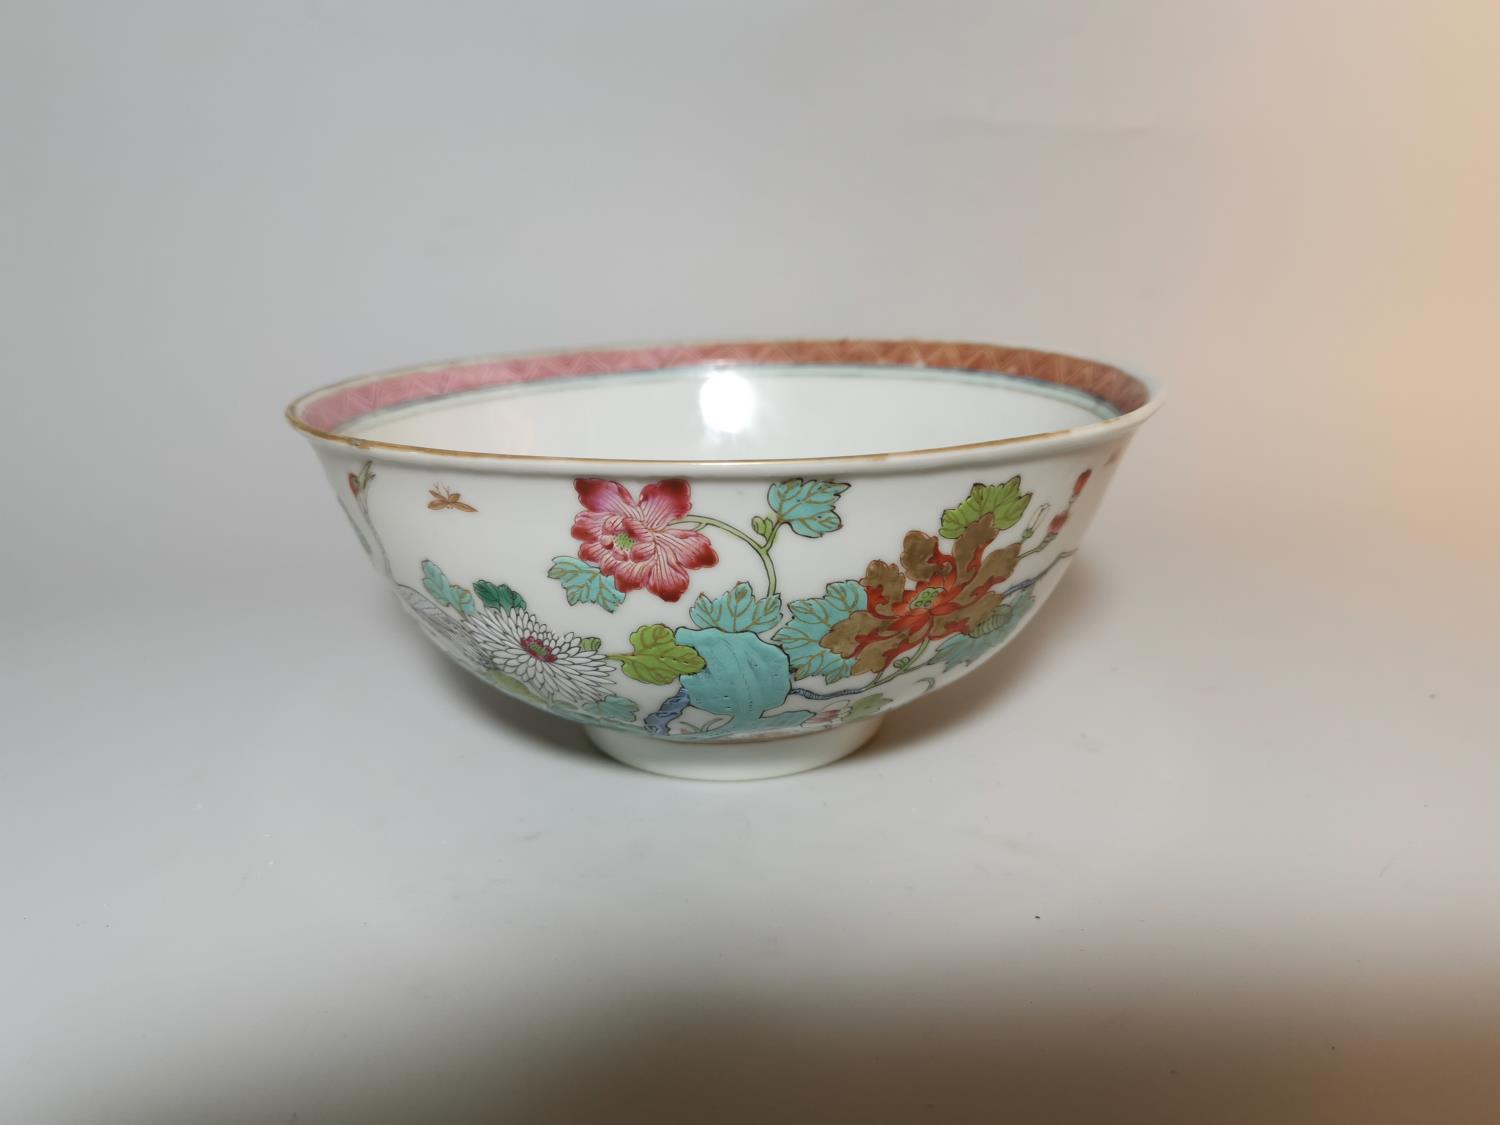 A late 19th/early 20th century Chinese porcelain bowl decorated with exotic birds and plants in